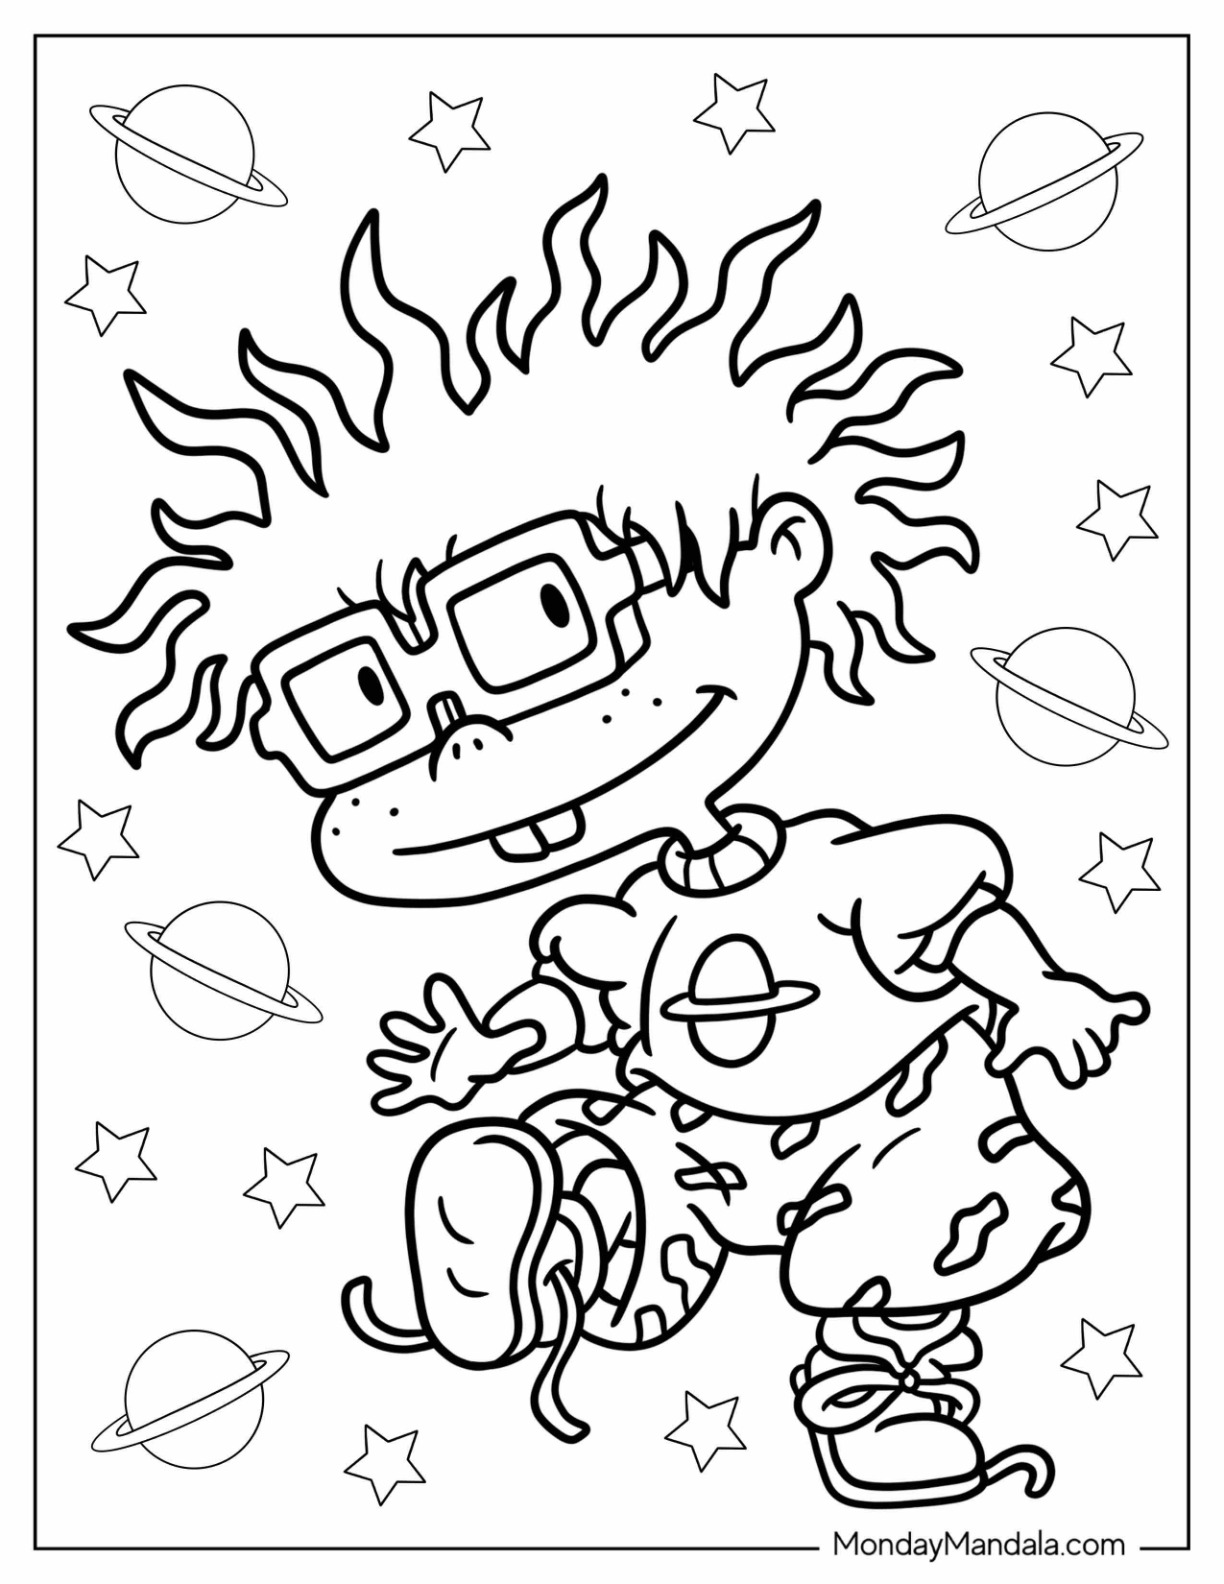 Rugrats coloring pages free pdf printables